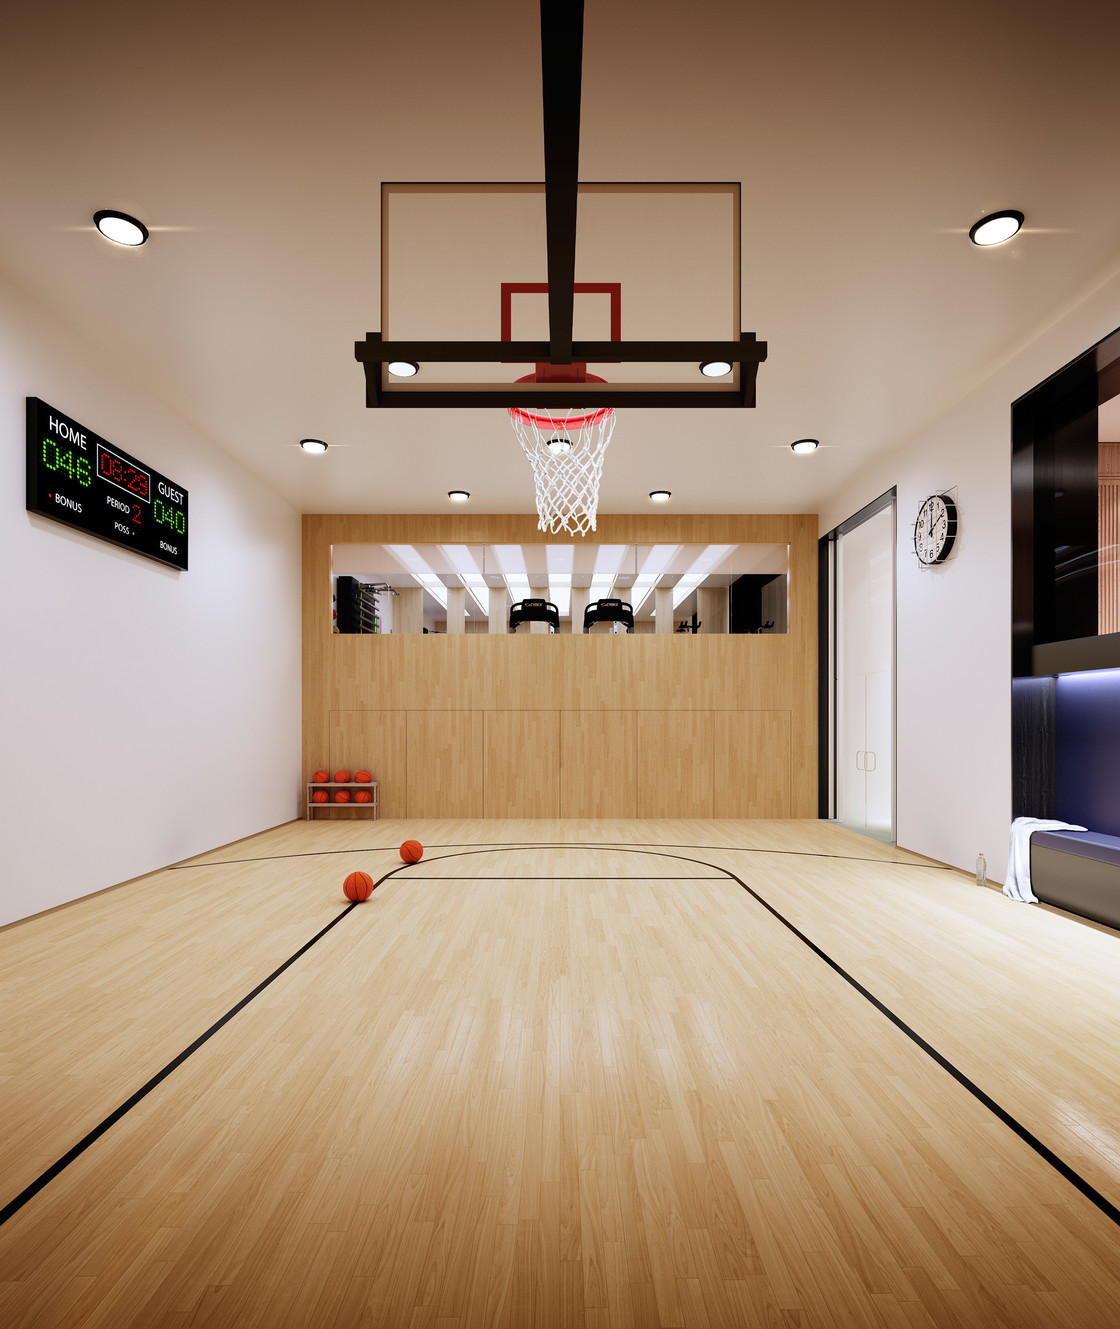 The building’s unique basketball court offers endless possibilities for fun. Residents have their own private space to play—whether it’s shooting baskets after dinner, hosting a yoga class on the weekend, or just running around on a rainy day. 